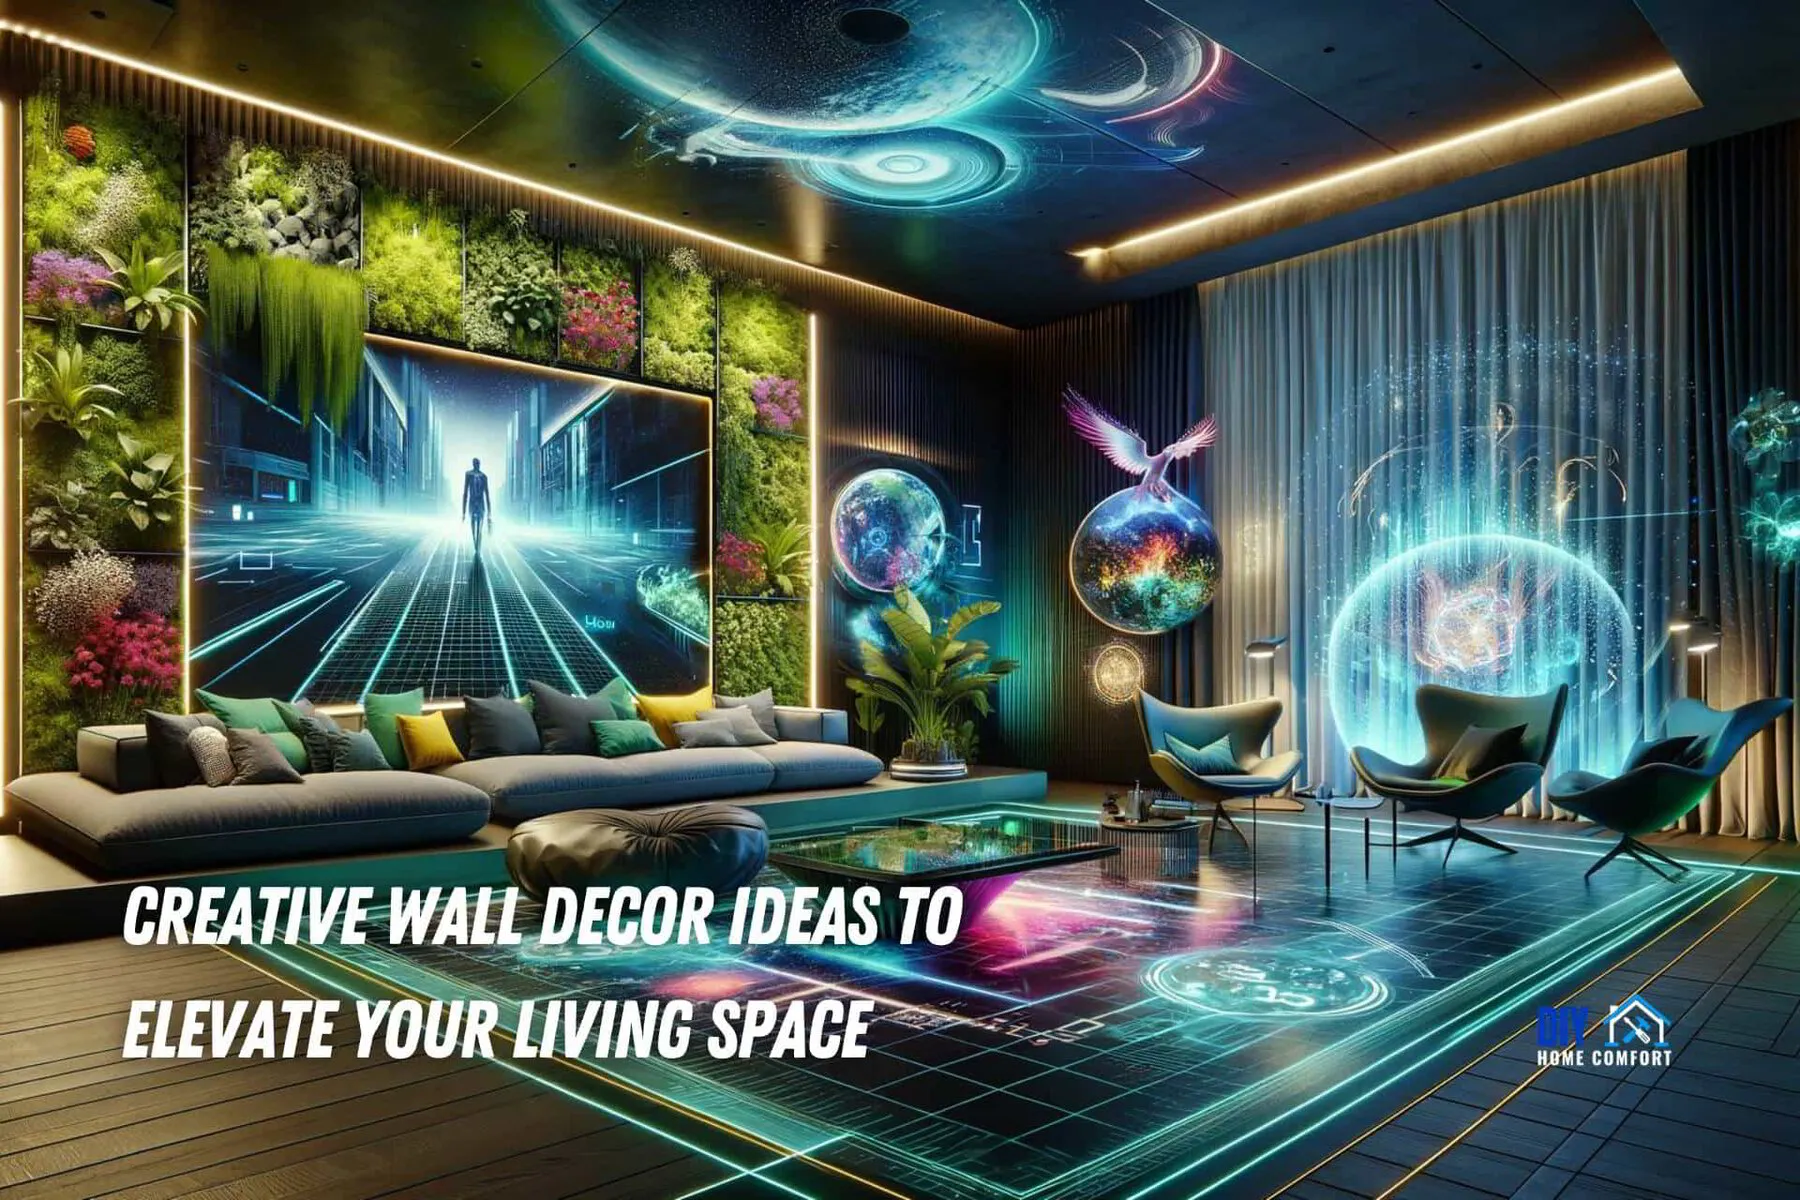 42 Creative Wall Decor Ideas to Elevate Your Living Space | DIY Home Comfort